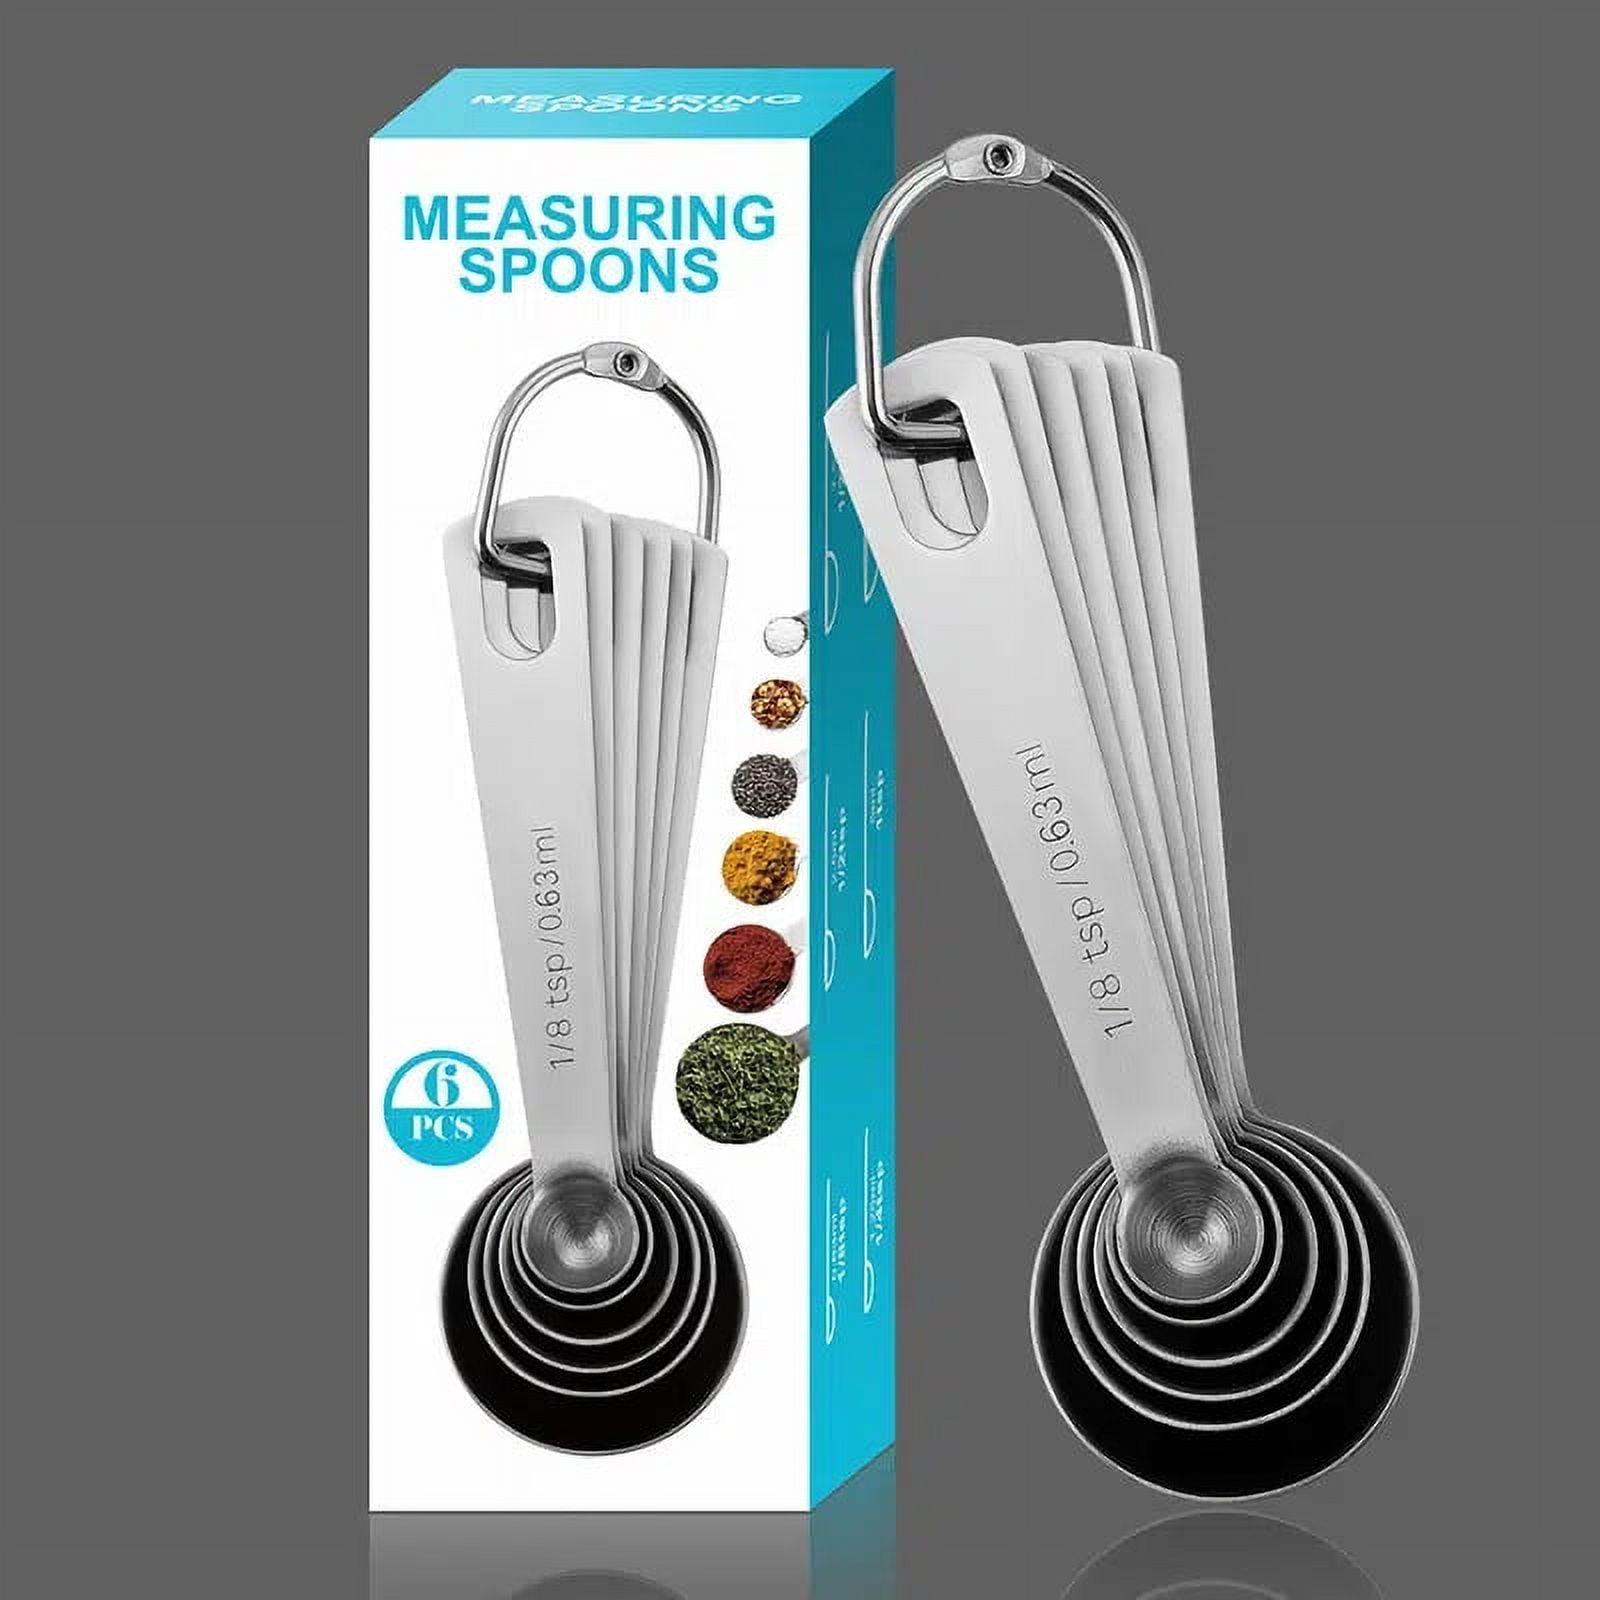 Edencomer Metal Measuring Spoons Set of 8 18/8 Stainless Steel Kitchen Measure  Spoon Kit Tools With 1/8, 1/3 and 1/16 Teaspoon, 1/2 Tablespoon for Dry and  Liquid price in Saudi Arabia,  Saudi Arabia